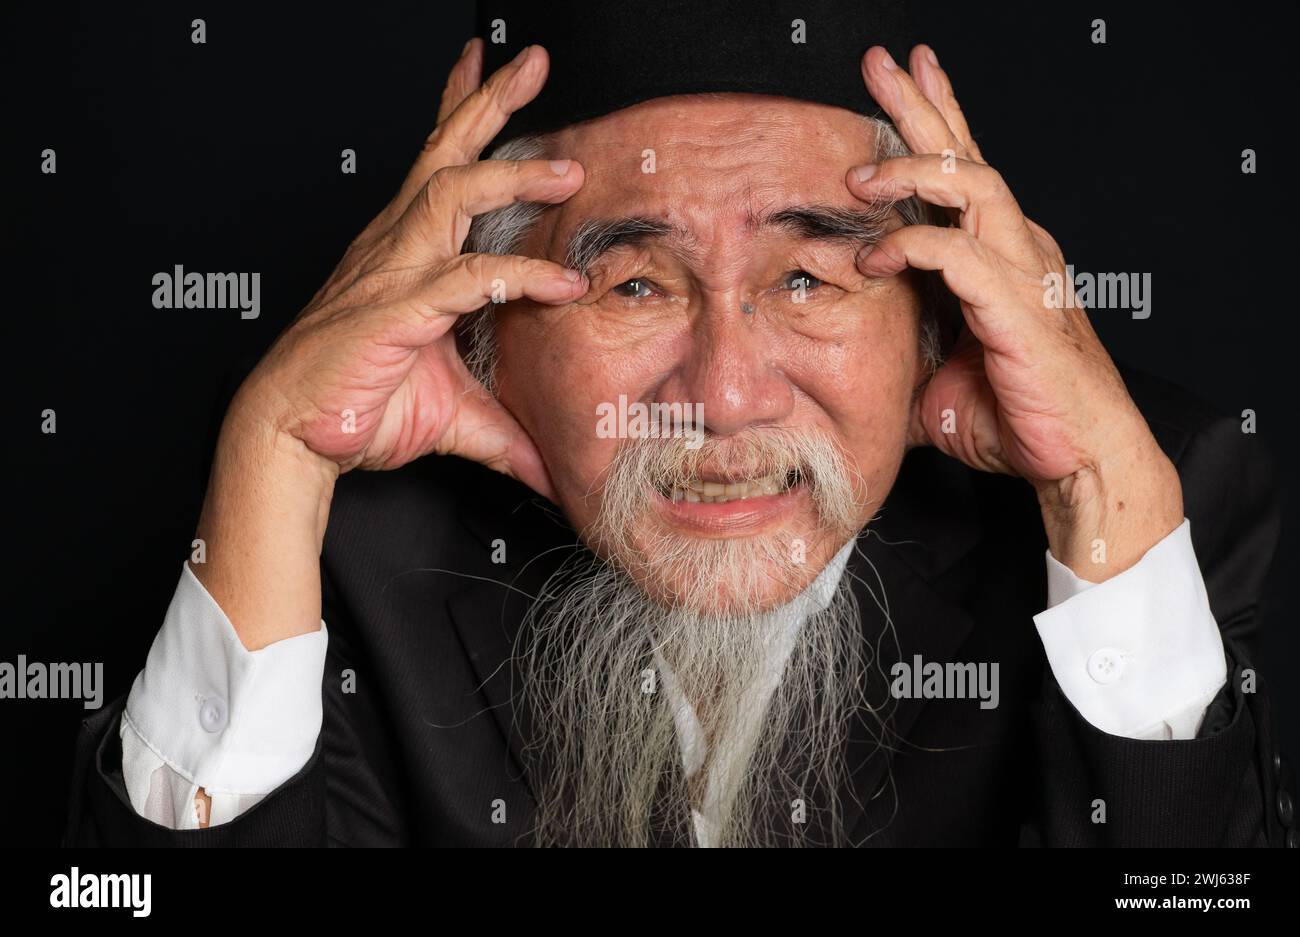 Portrait of a wrinkled-faced old man with a long white beard on a black background, studio shot Stock Photo